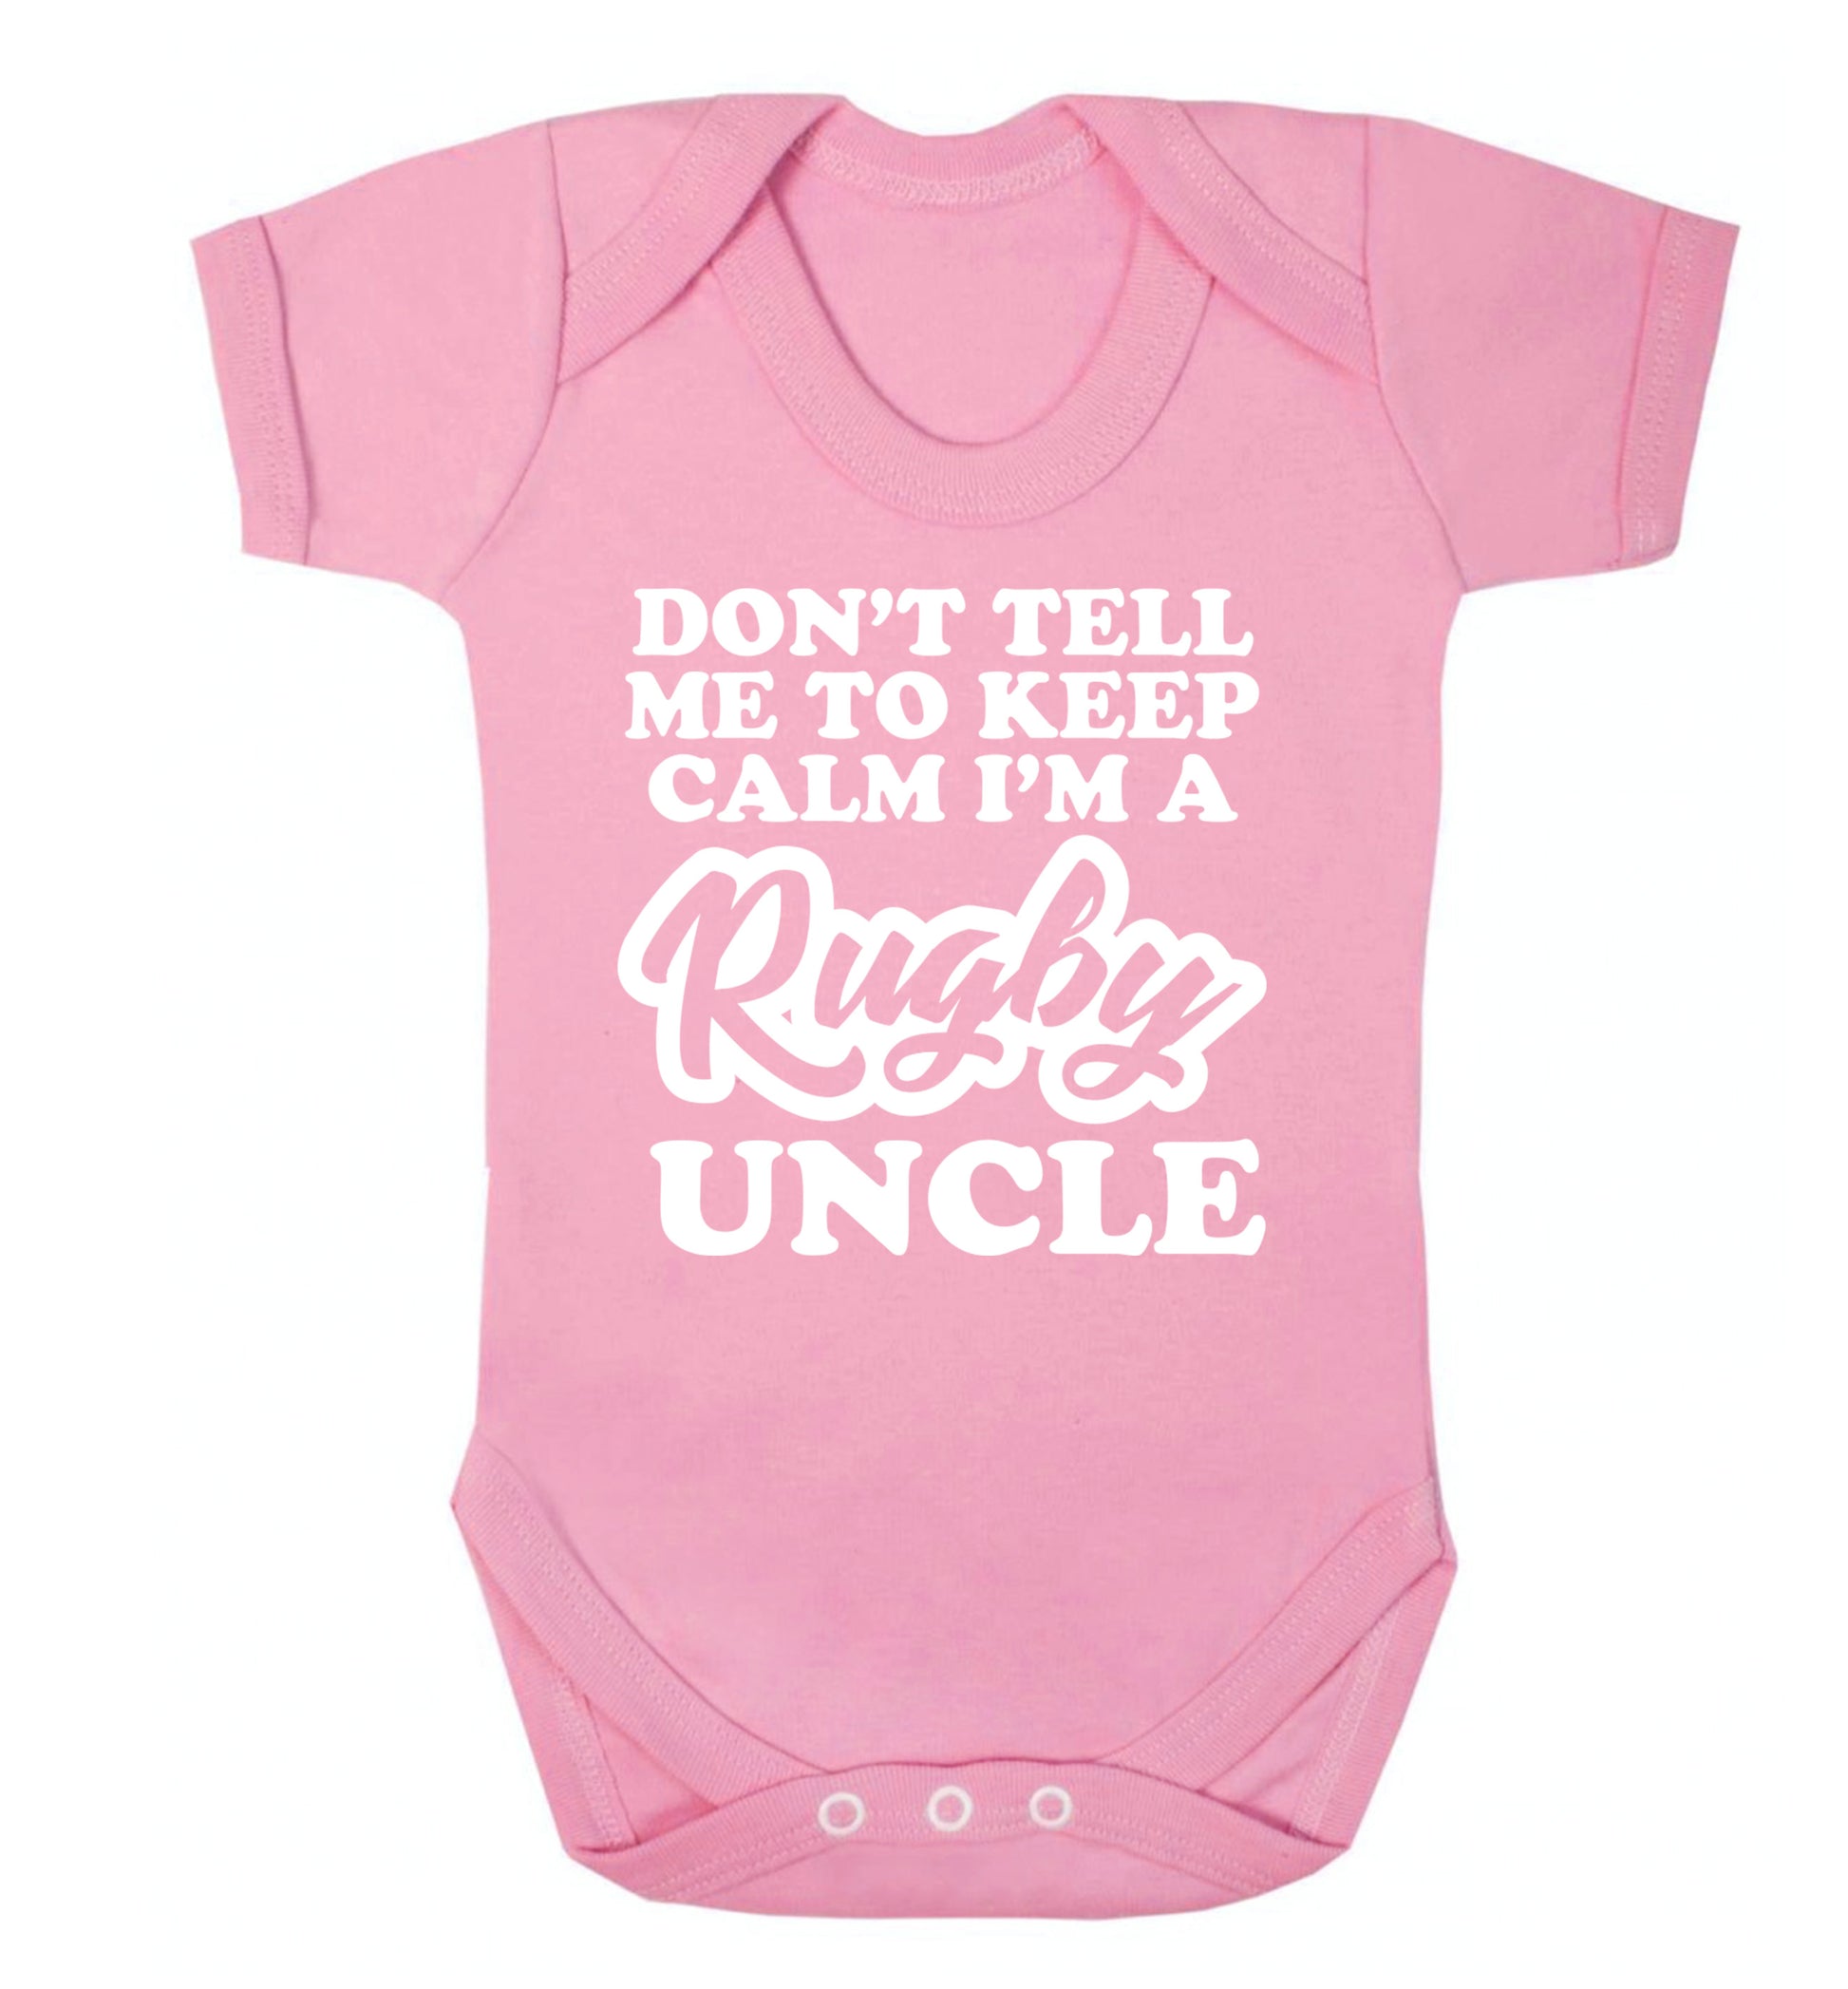 Don't tell me to keep calm I'm a rugby uncle Baby Vest pale pink 18-24 months